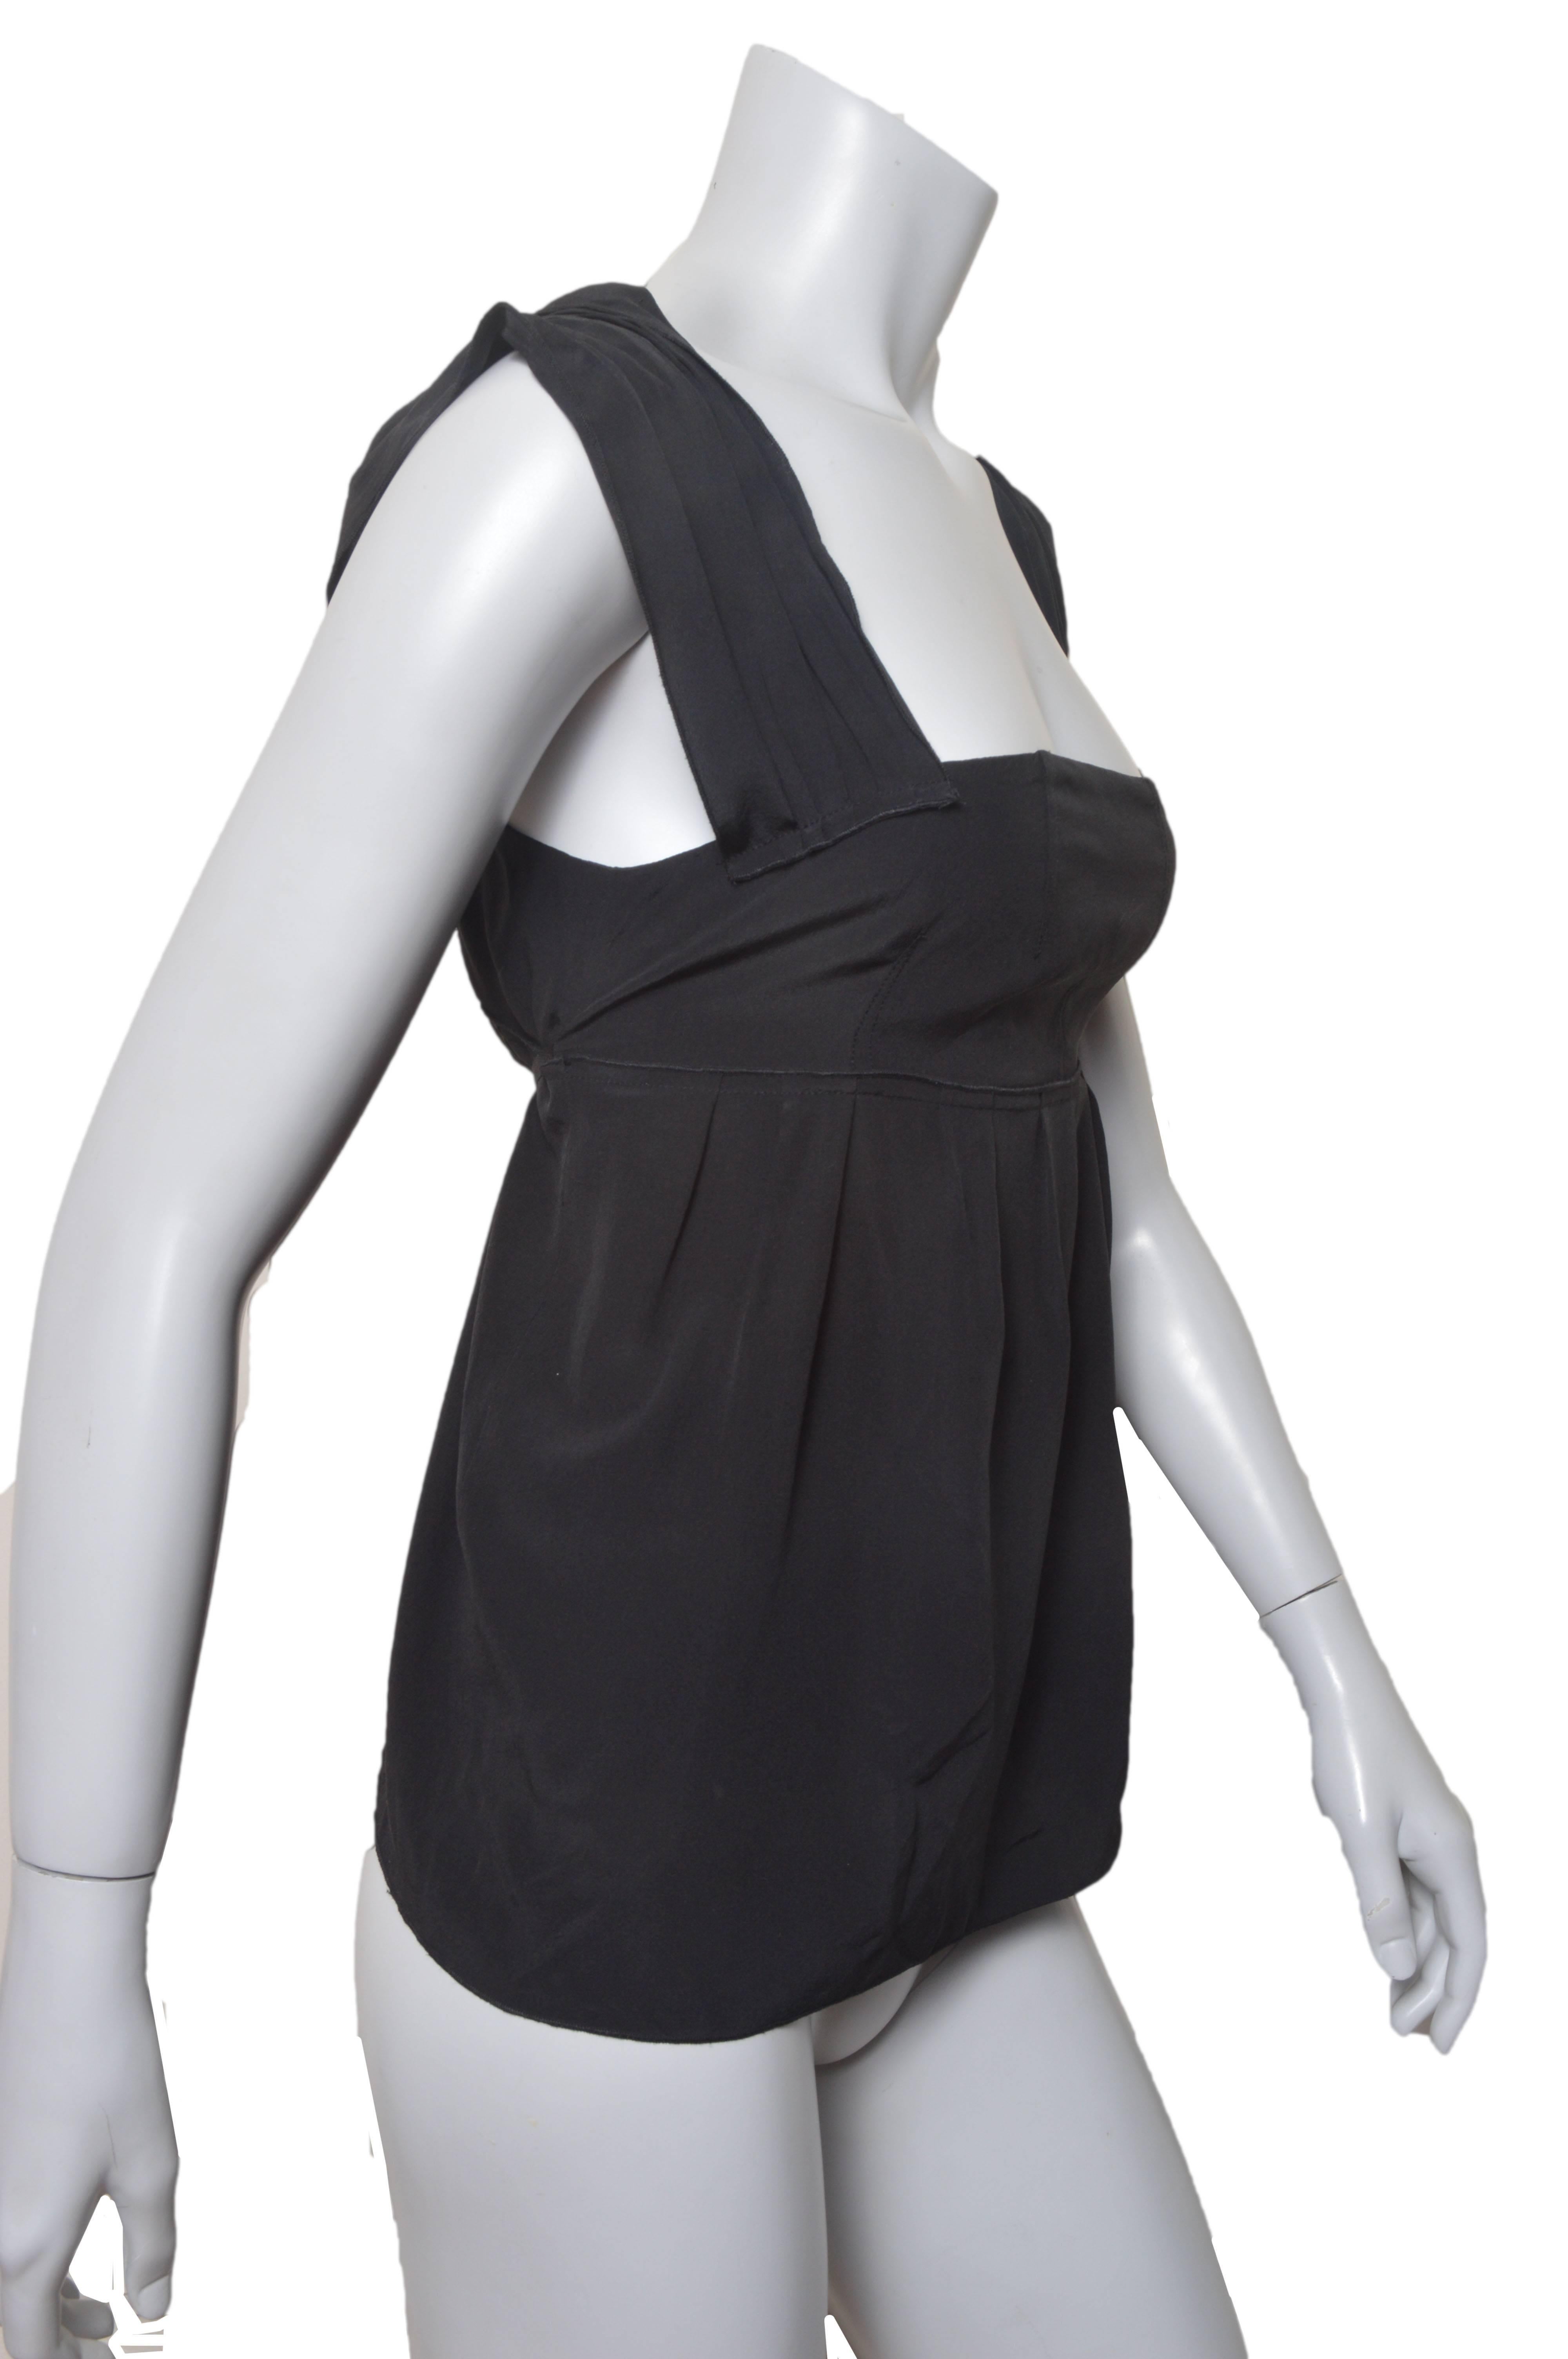 Lovely Miu Miu black sleeveless blouse.
Pleated shoulder straps.
Fitted top with empire waist.
Loose inverted pleat hem. 
Self tie at waist.
Side zipper.
Tagged a size 42.